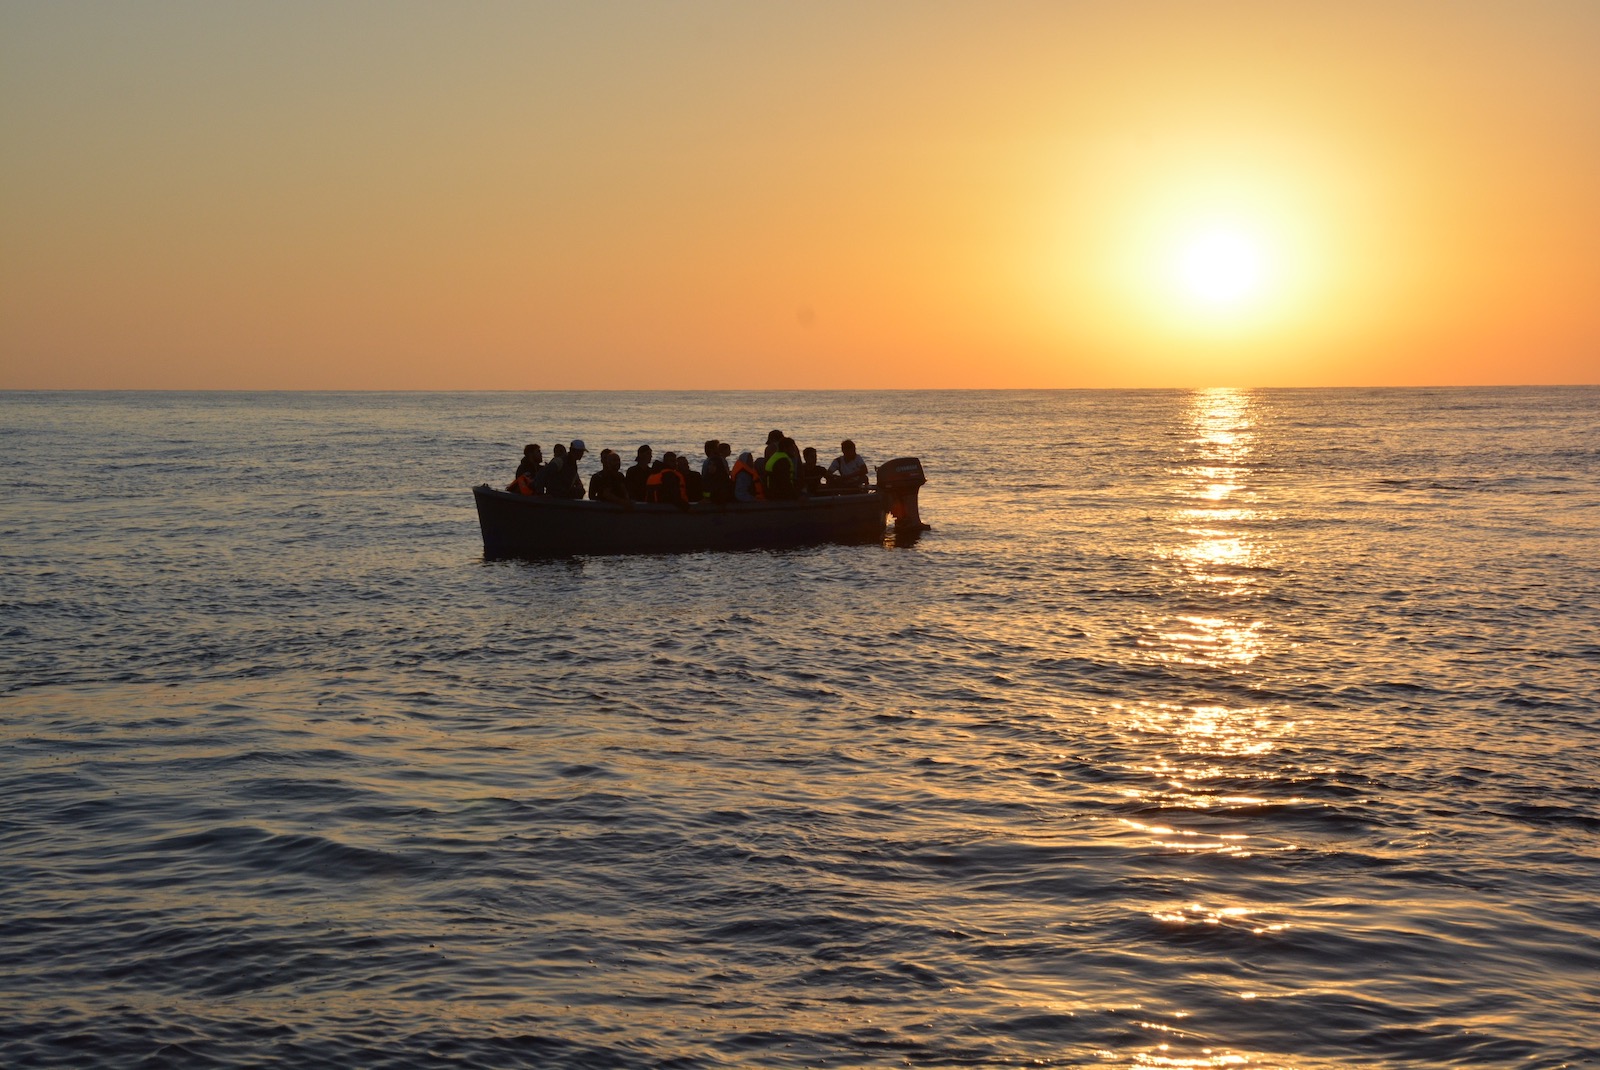 A boat full of people at sea, in silhouette against the setting sun